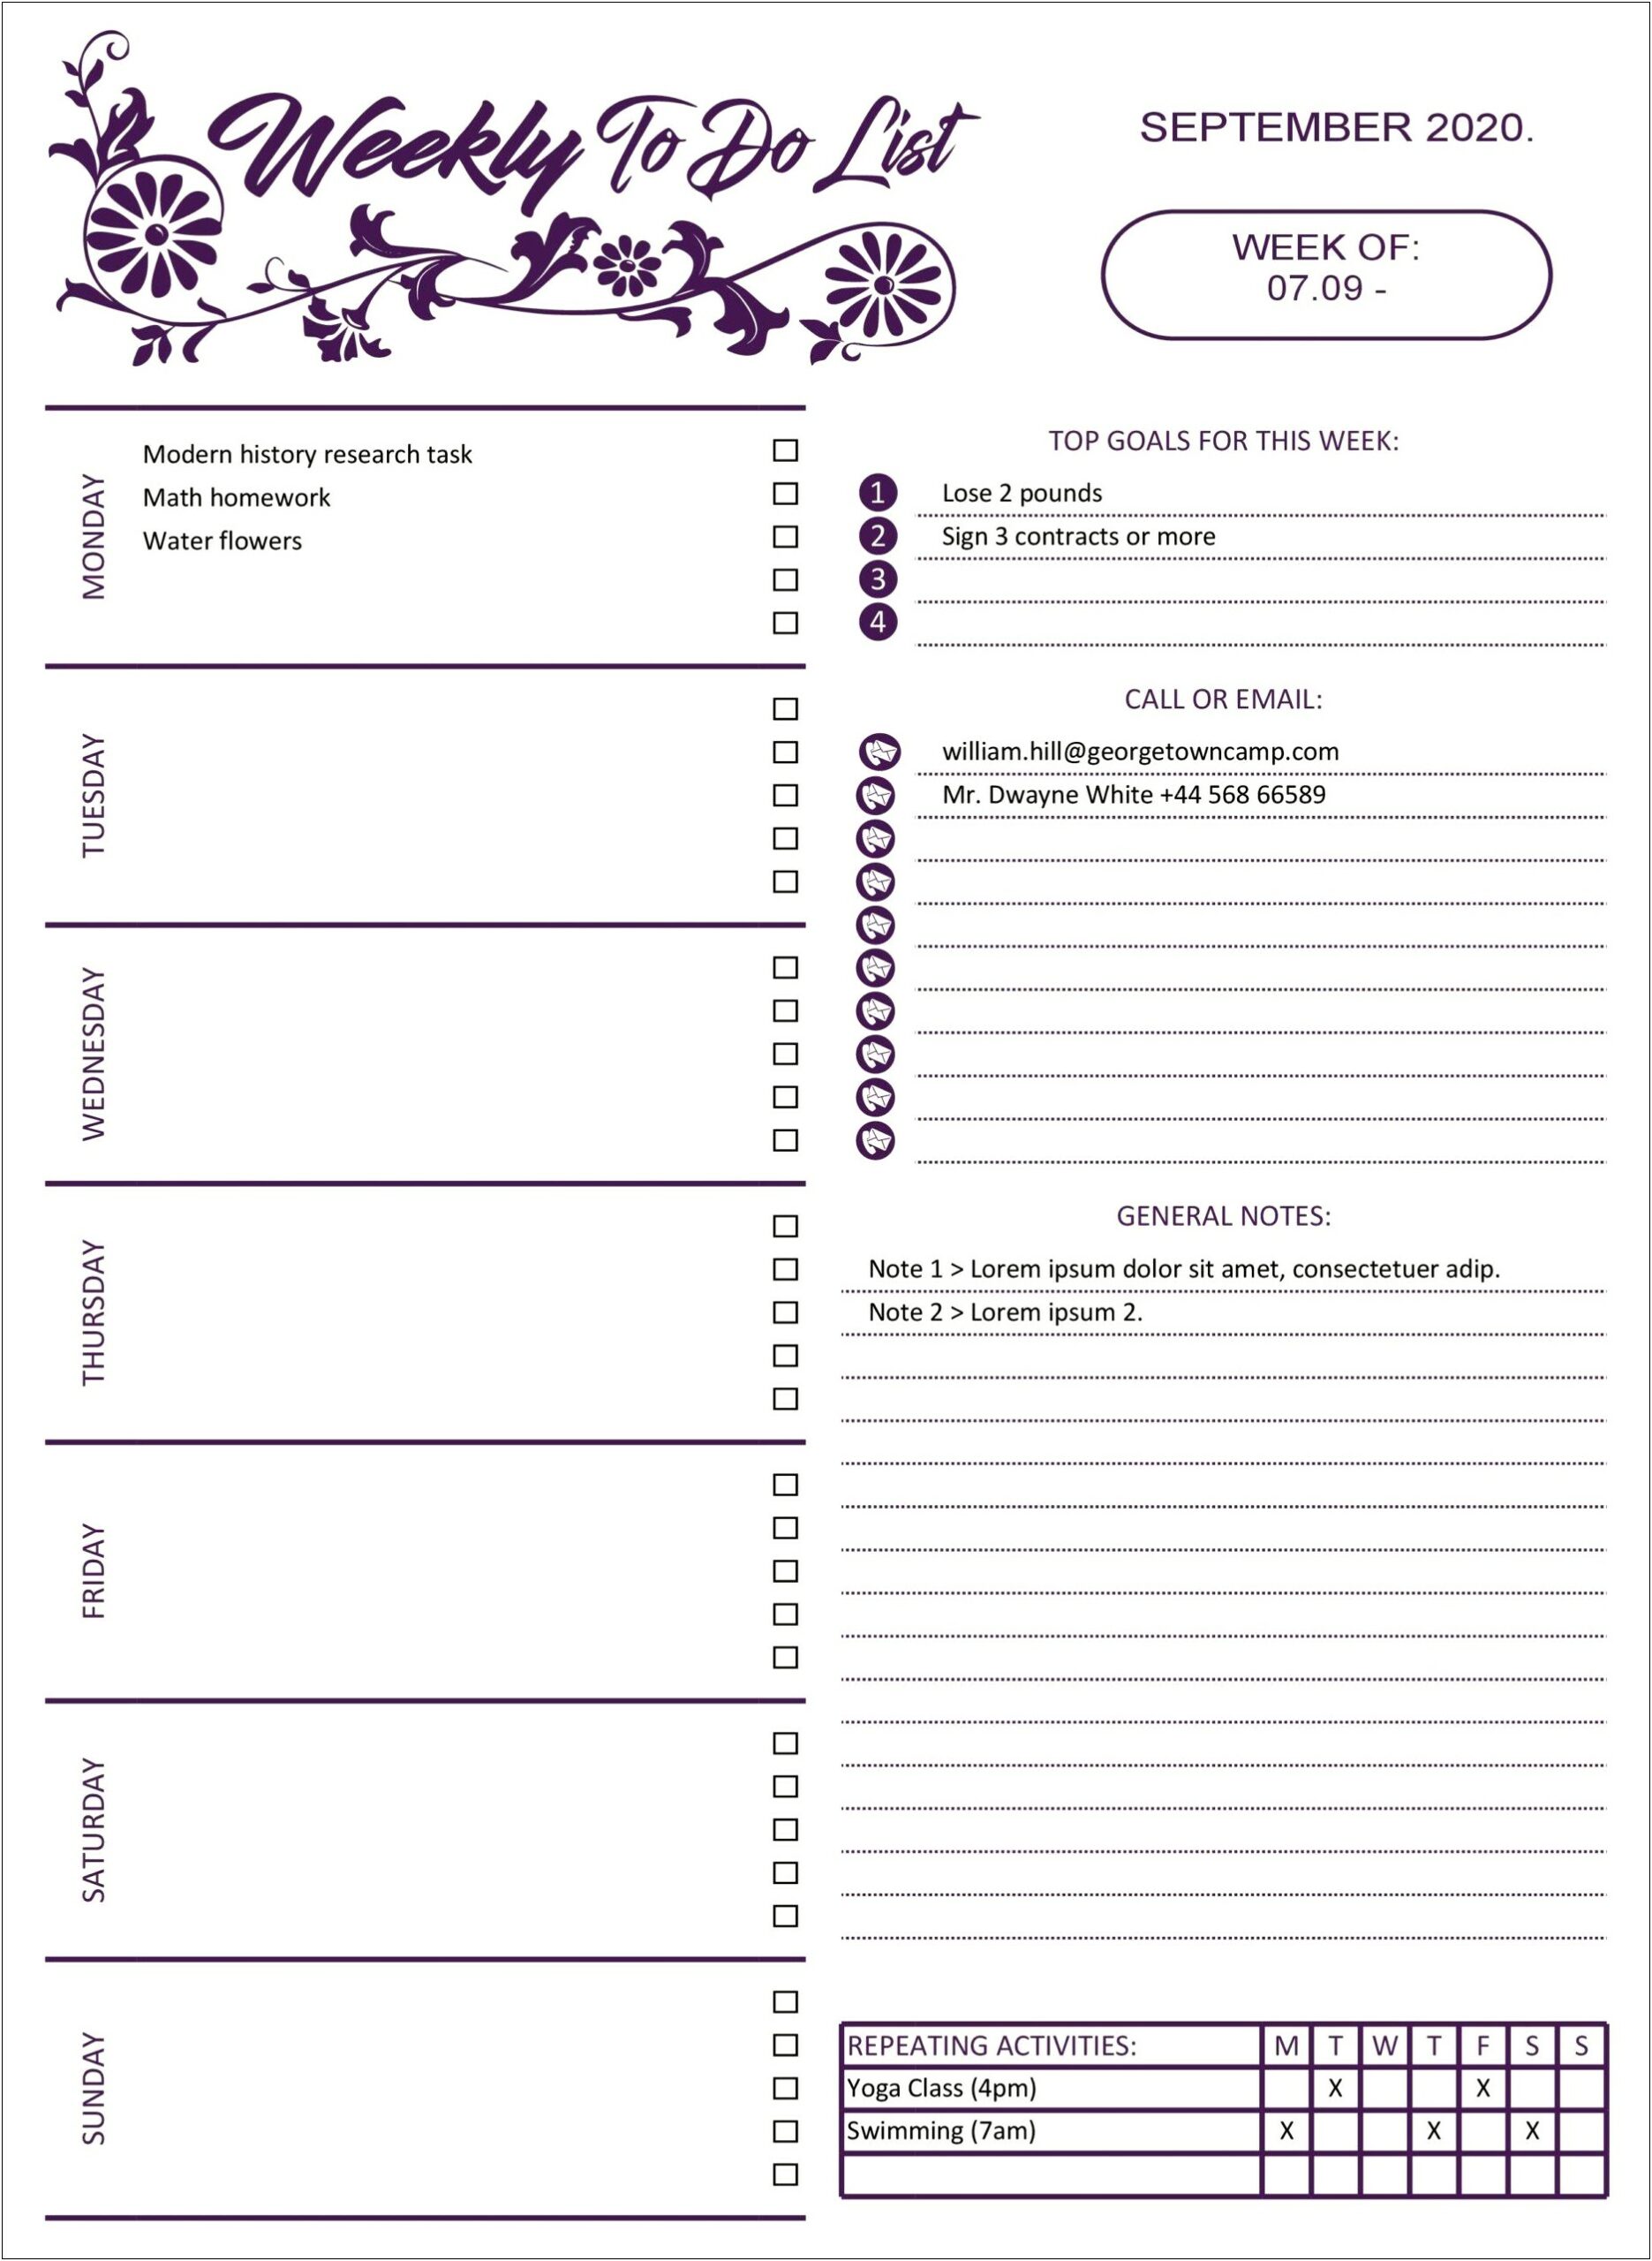 Free Printable To Do List Template With Cats